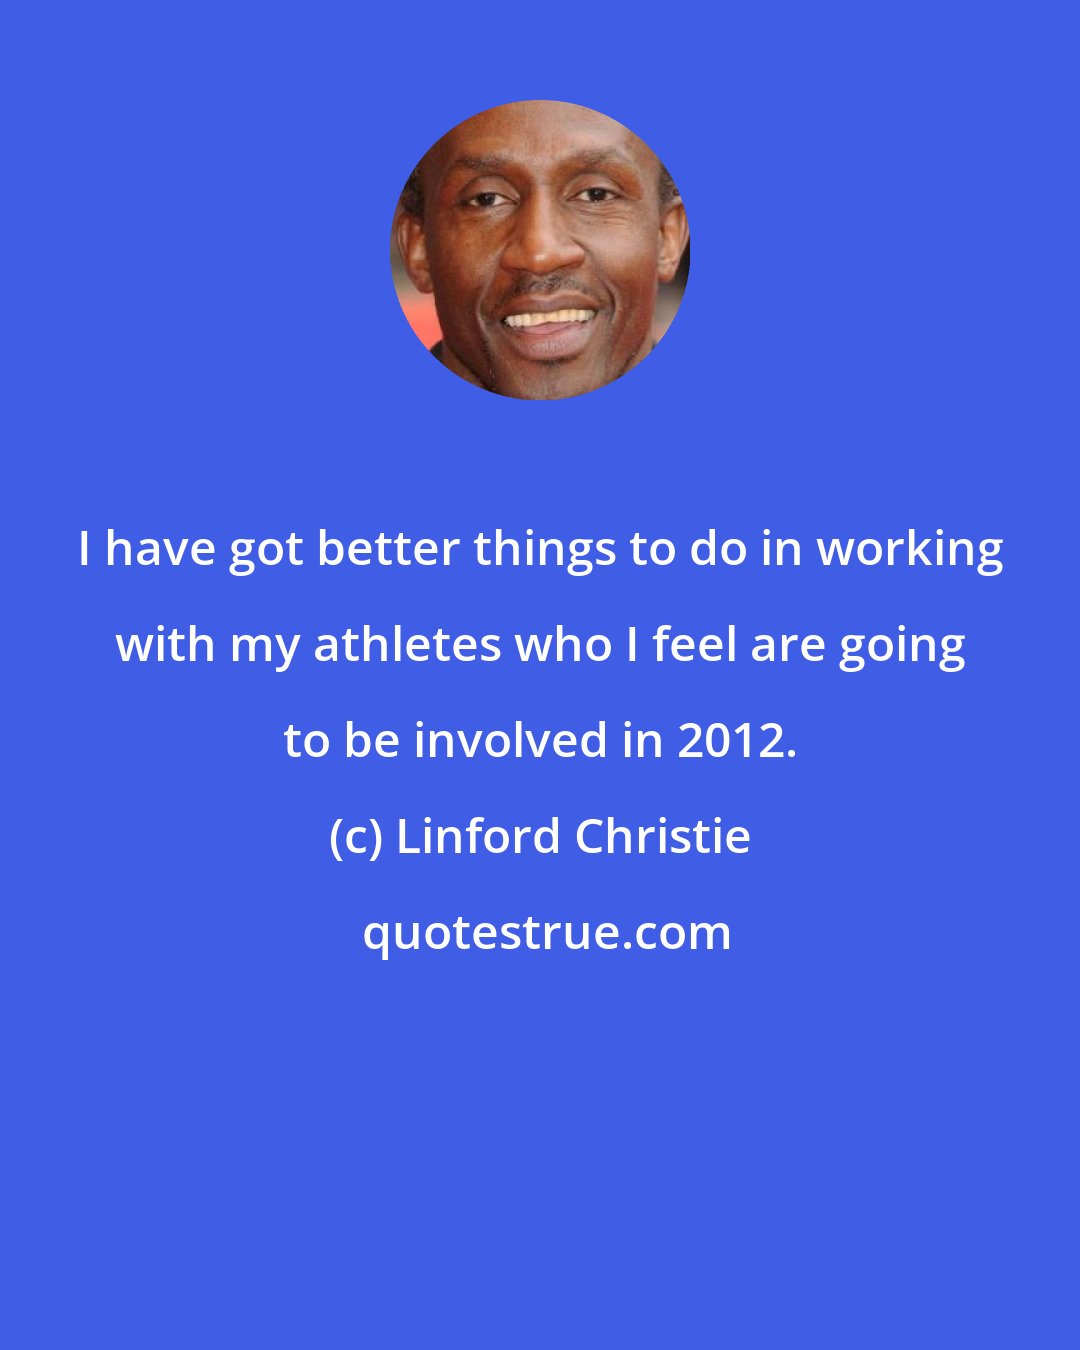 Linford Christie: I have got better things to do in working with my athletes who I feel are going to be involved in 2012.